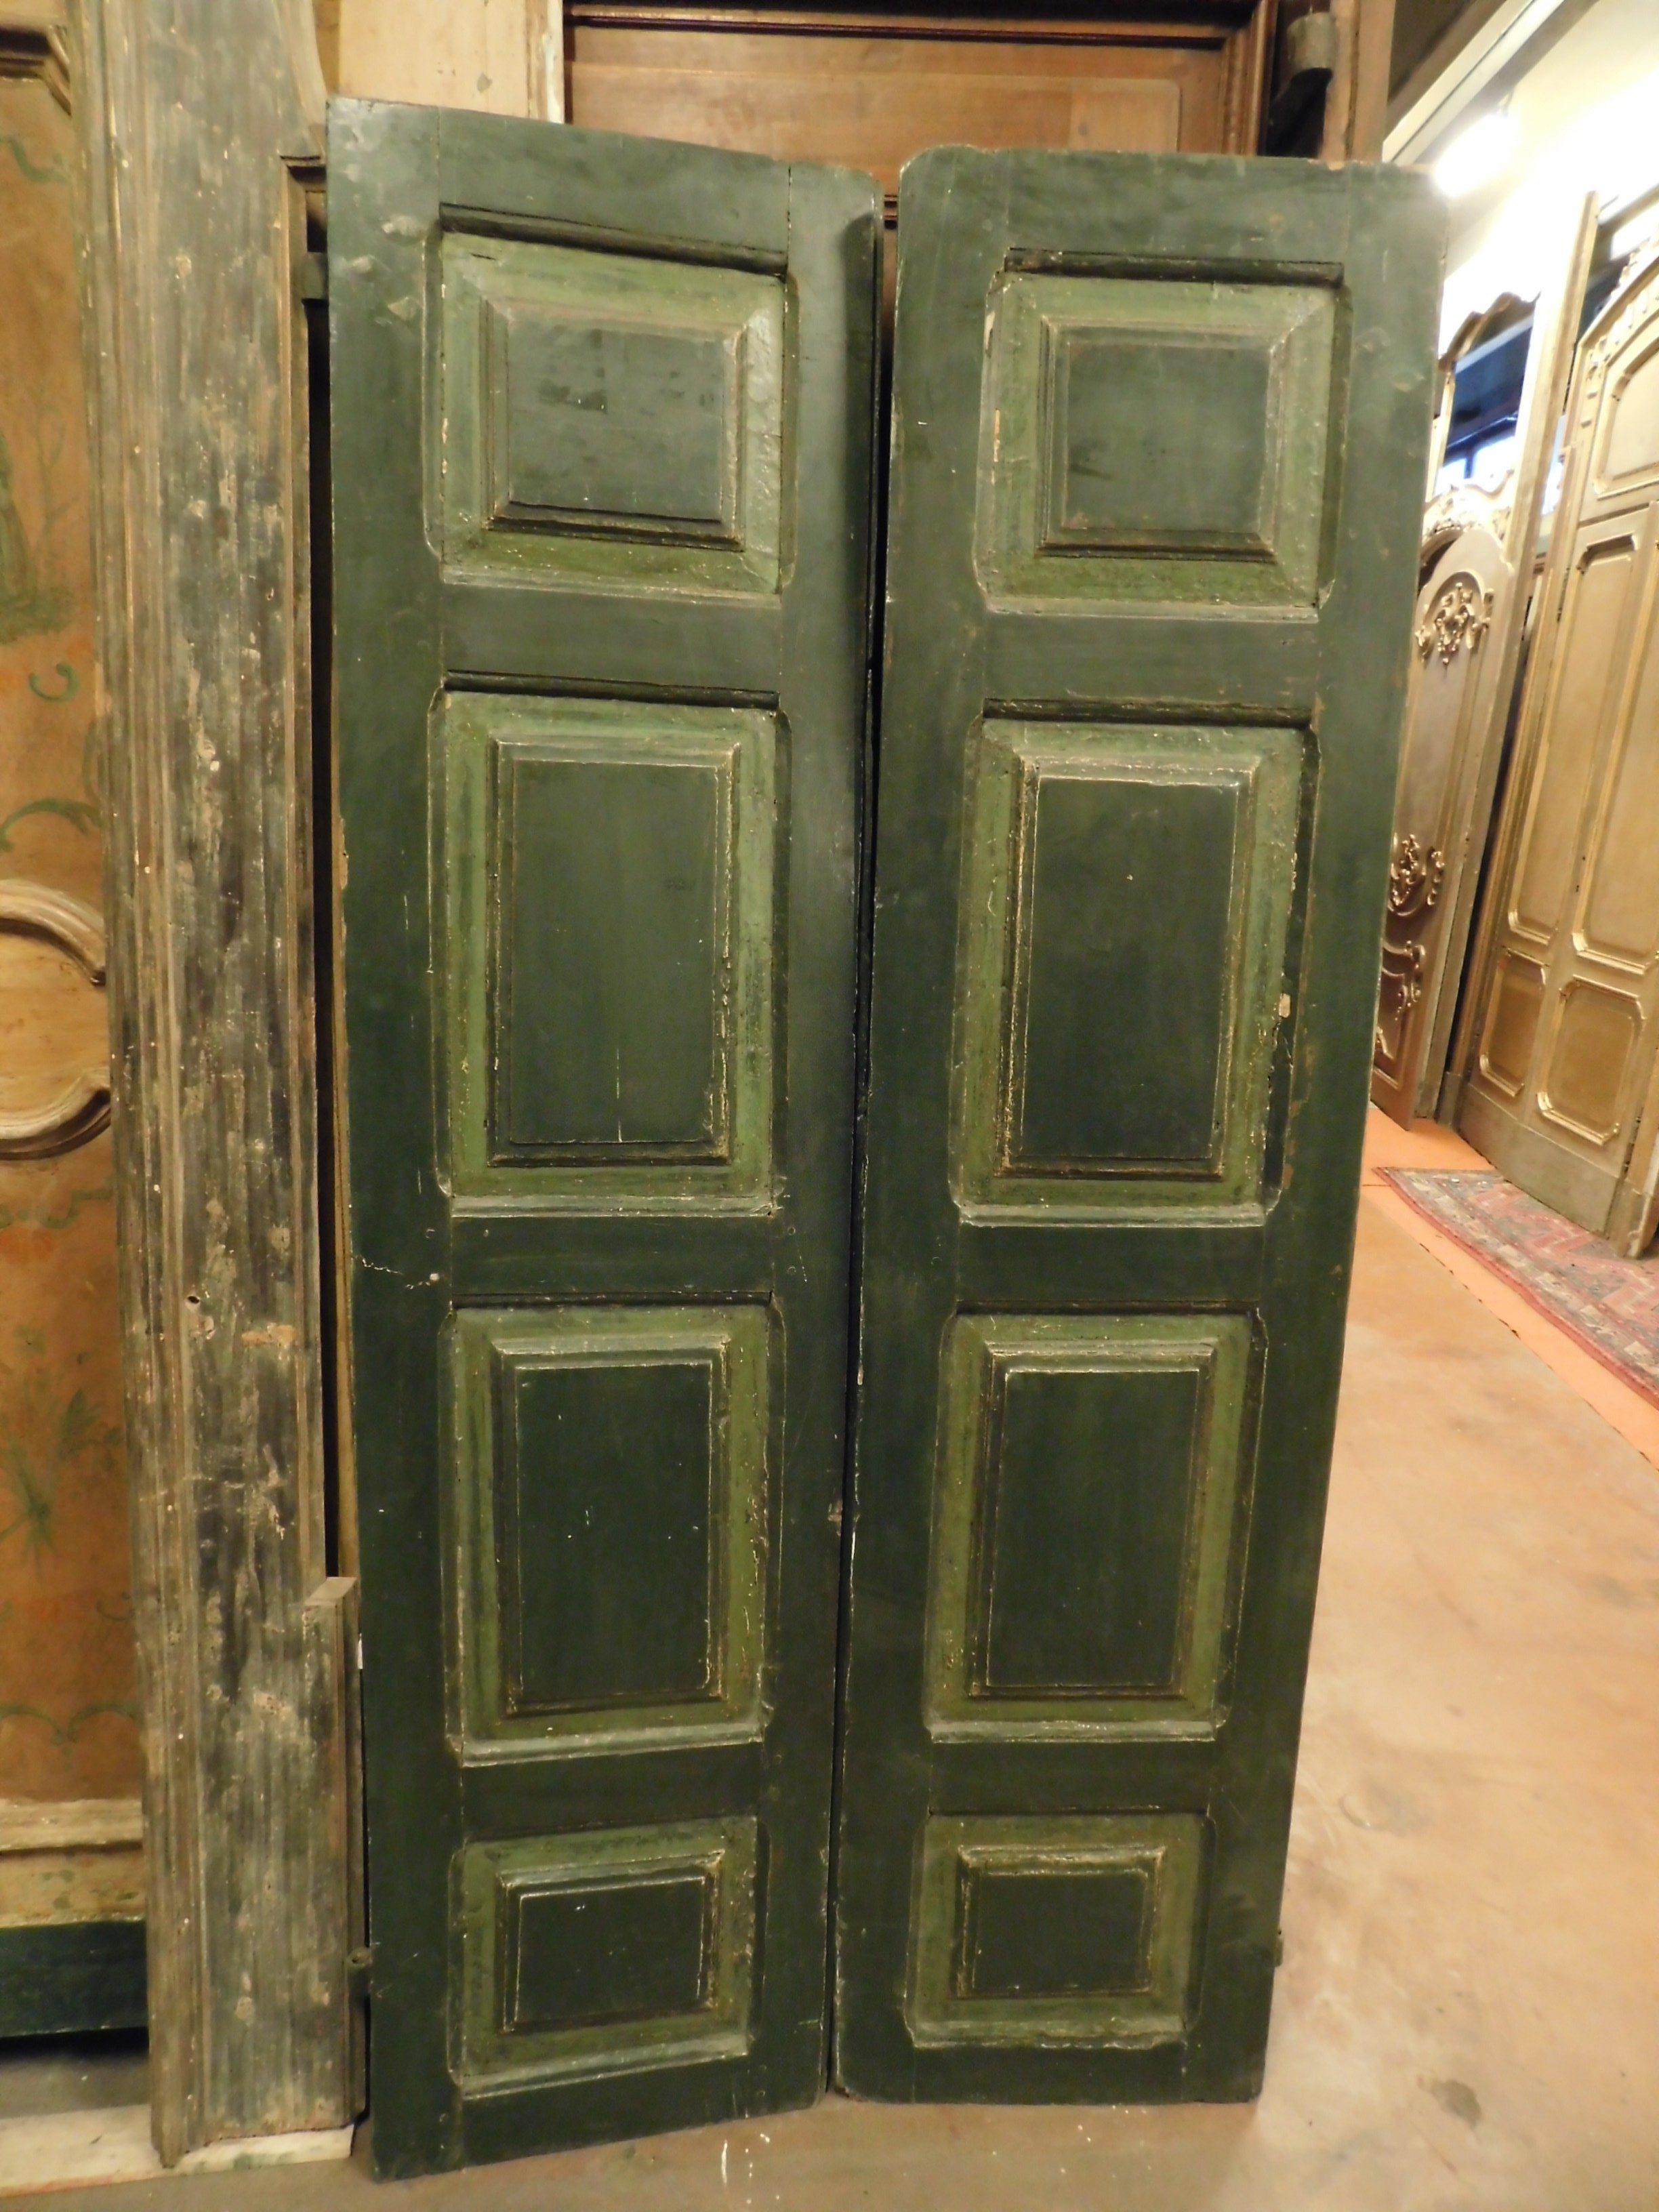 Antique wooden door, double wing, green lacquered by hand with 8 typical squares of the time, built in the 1700 in Italy, preserves the original irons (it was applied to the wall without a frame), in excellent and conservative original condition,